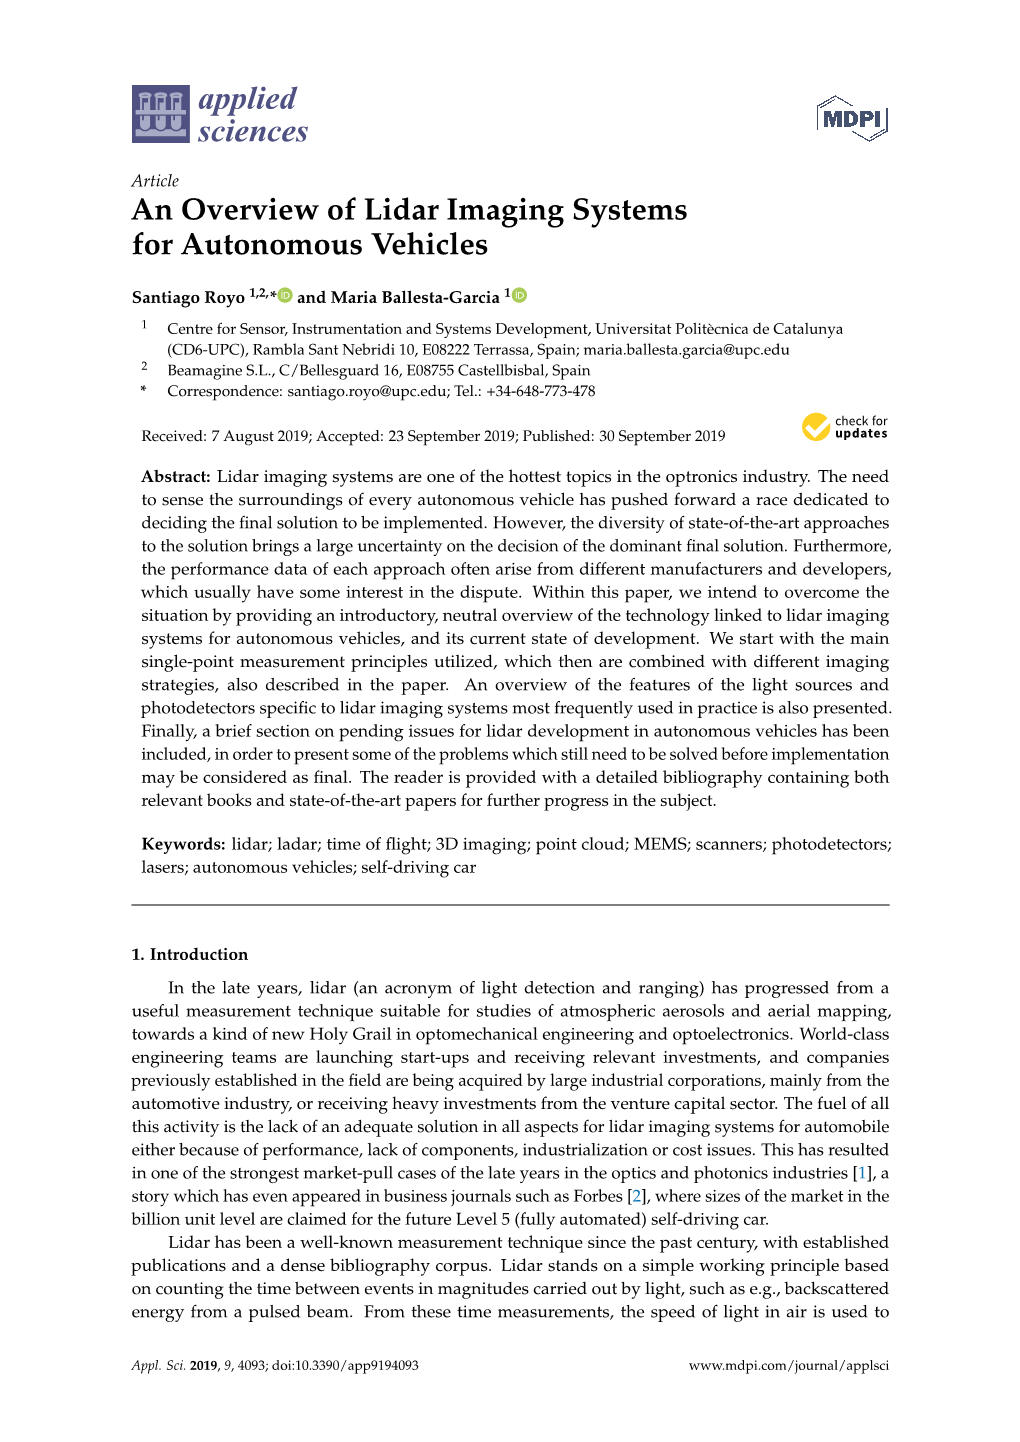 An Overview of Lidar Imaging Systems for Autonomous Vehicles